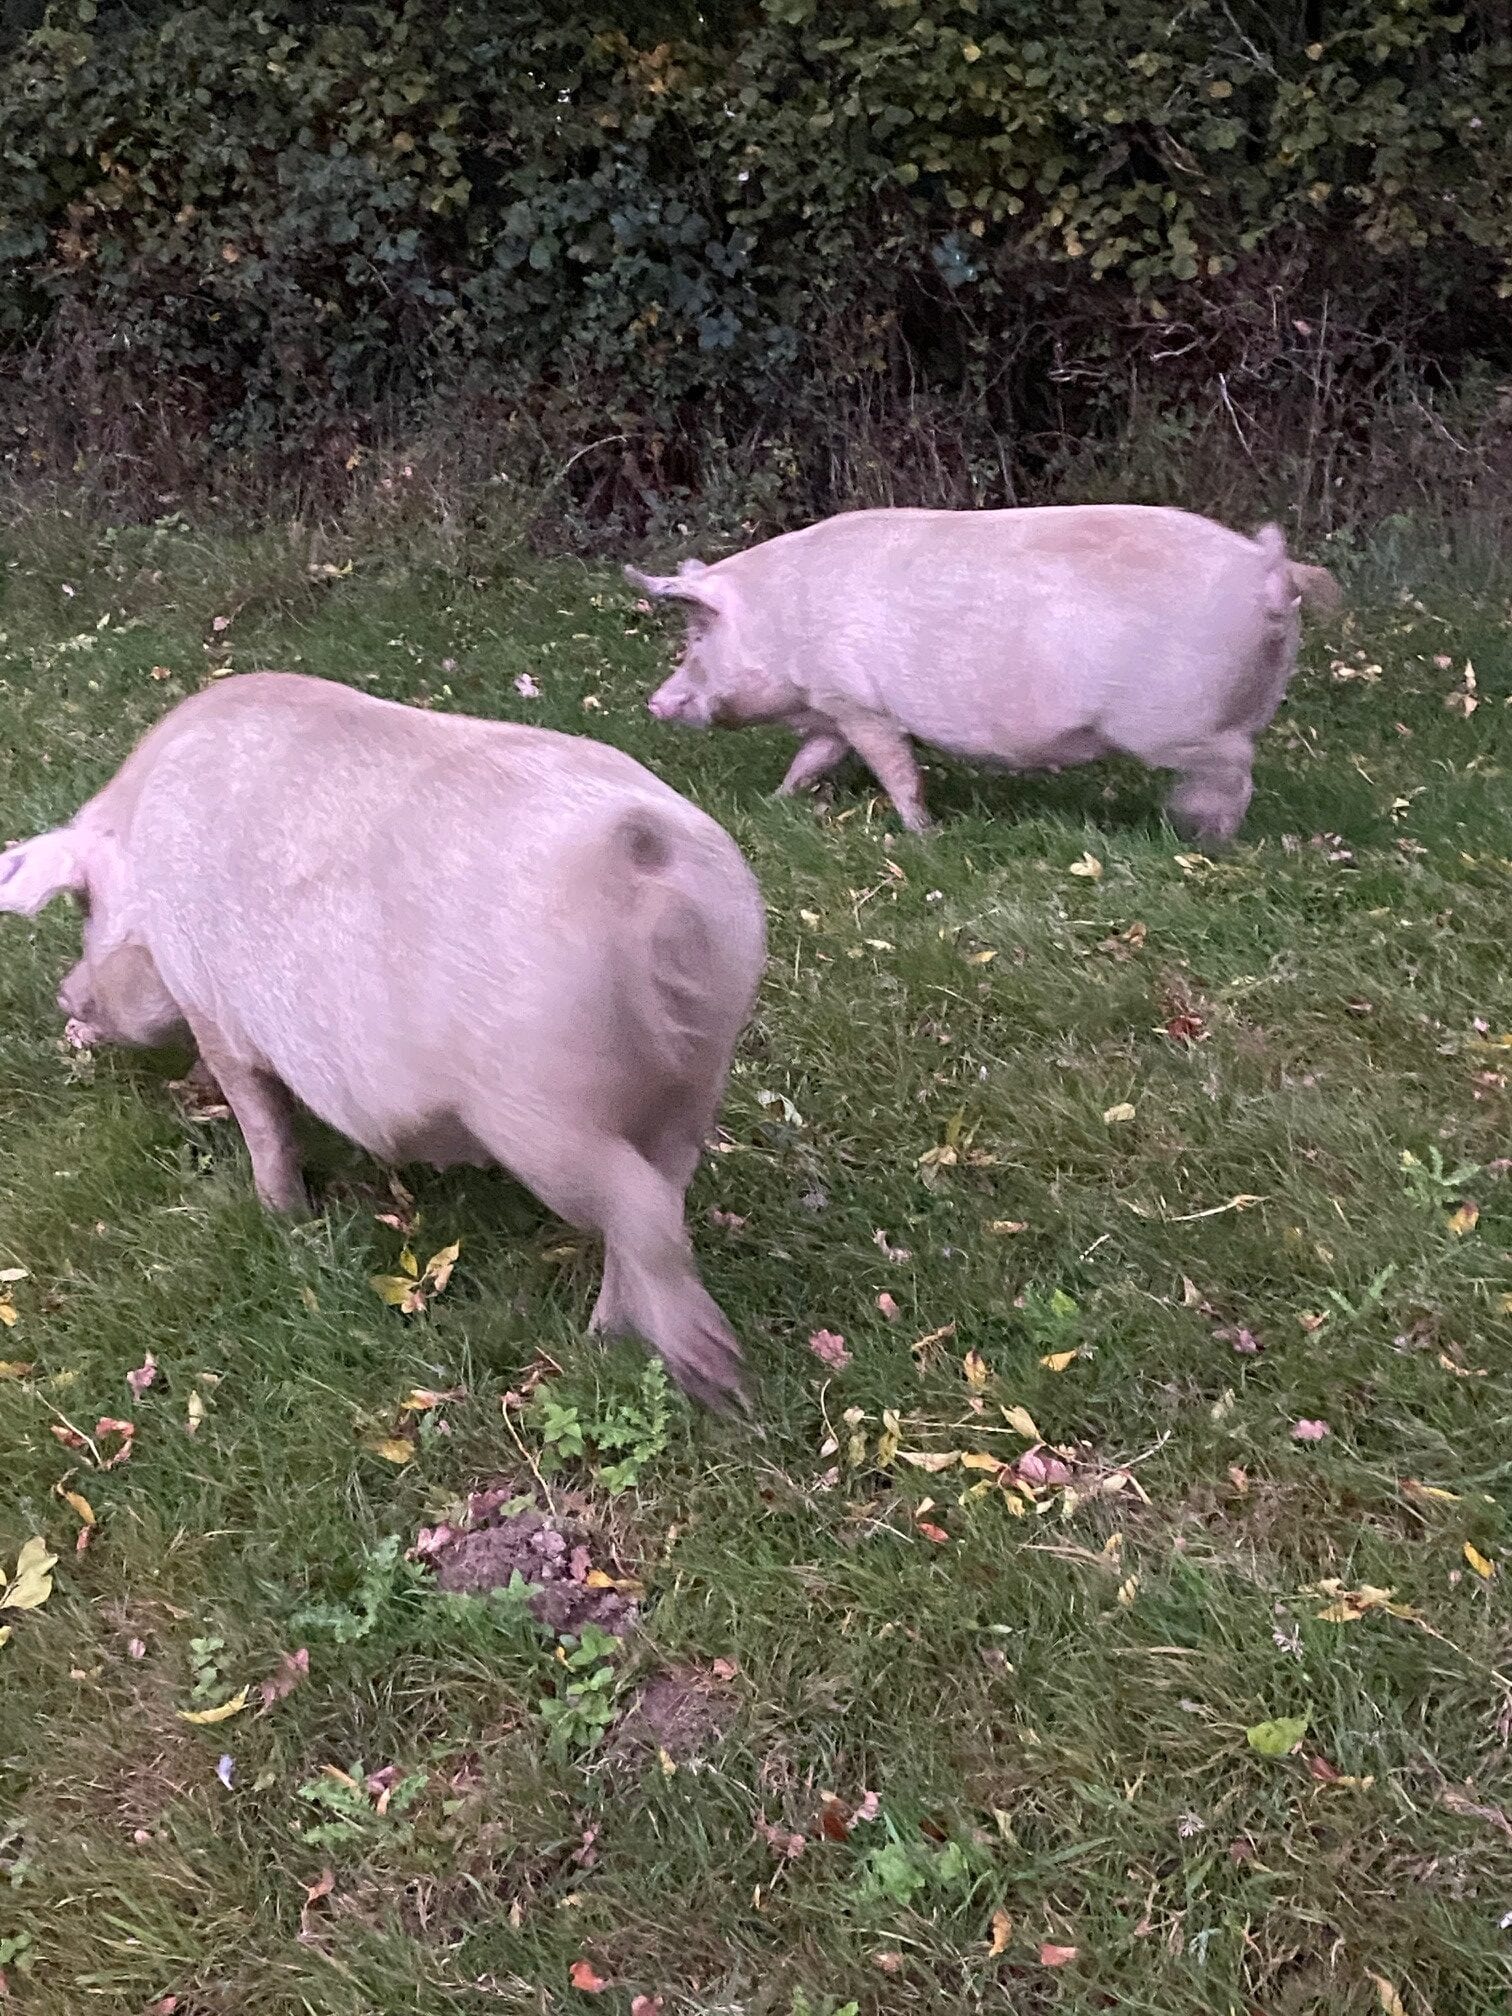 Looking for acorns the pink pannage pigs in the forest